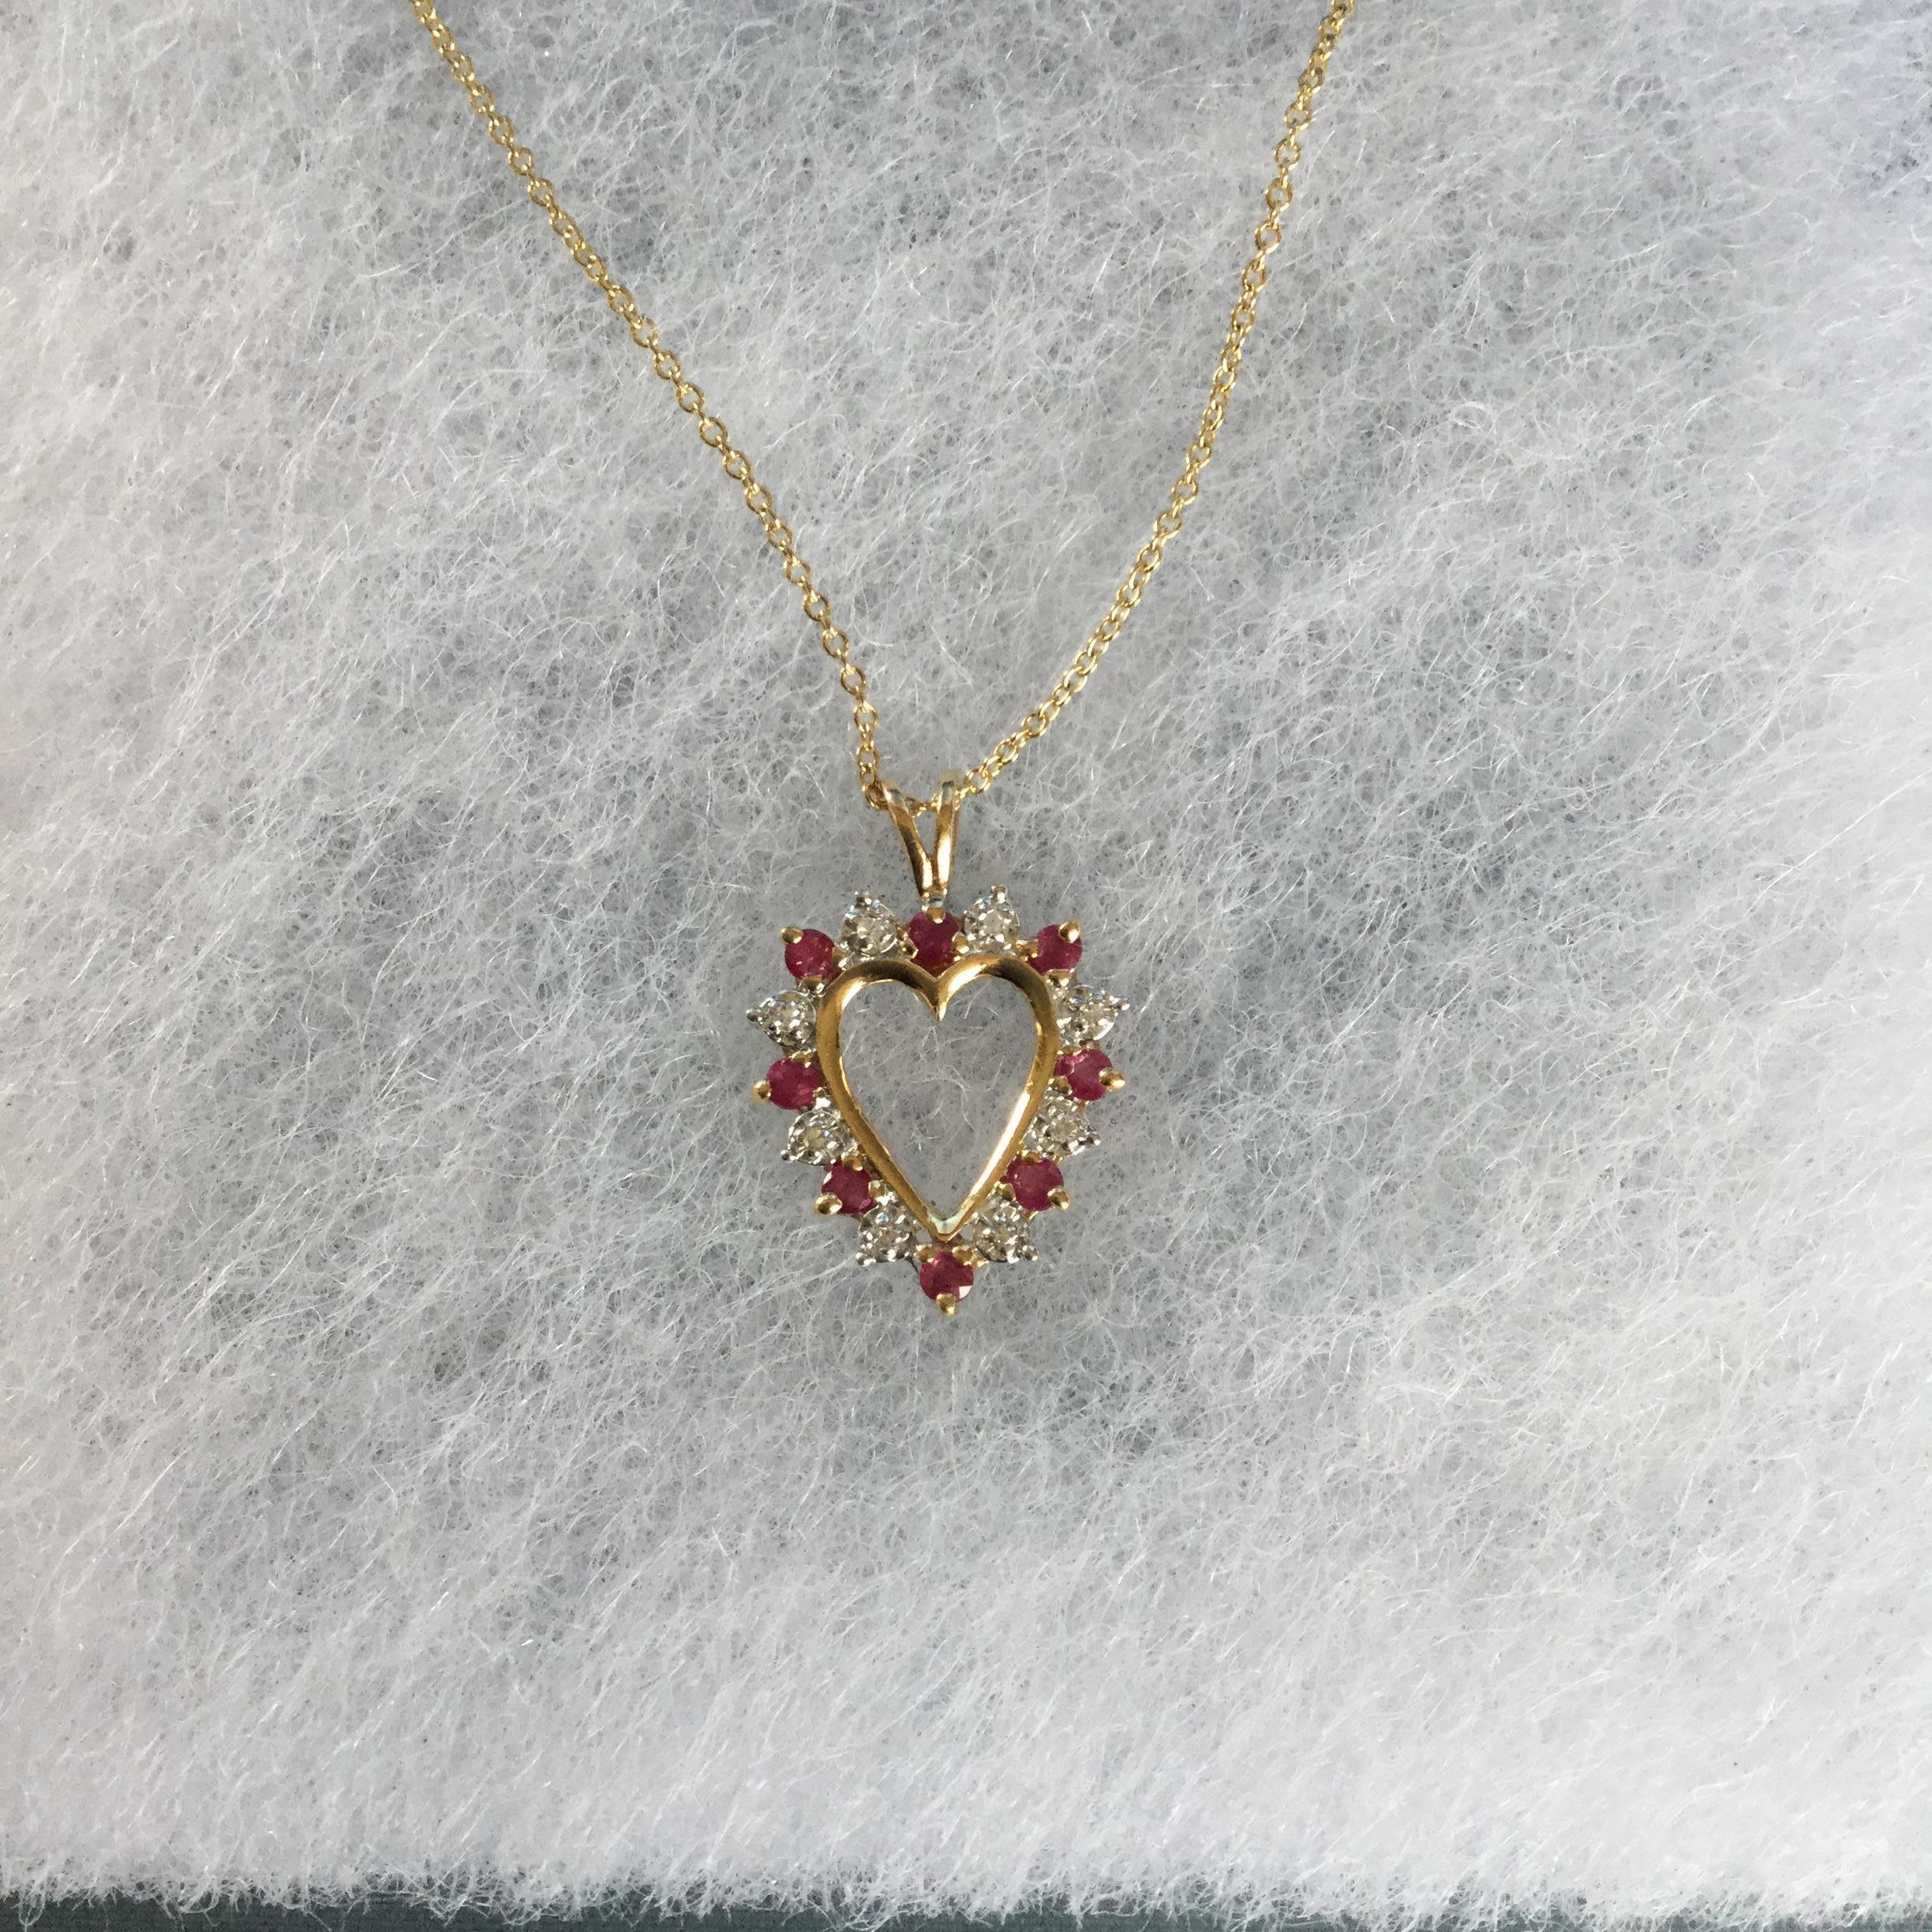 14K Yellow gold ruby and diamond heart shaped pendant necklace. The rubies weigh approx. 0.50 ctw and the diamonds weigh approx. 0.50 ctw. The pendant hangs on a 16 inch cable chain.  